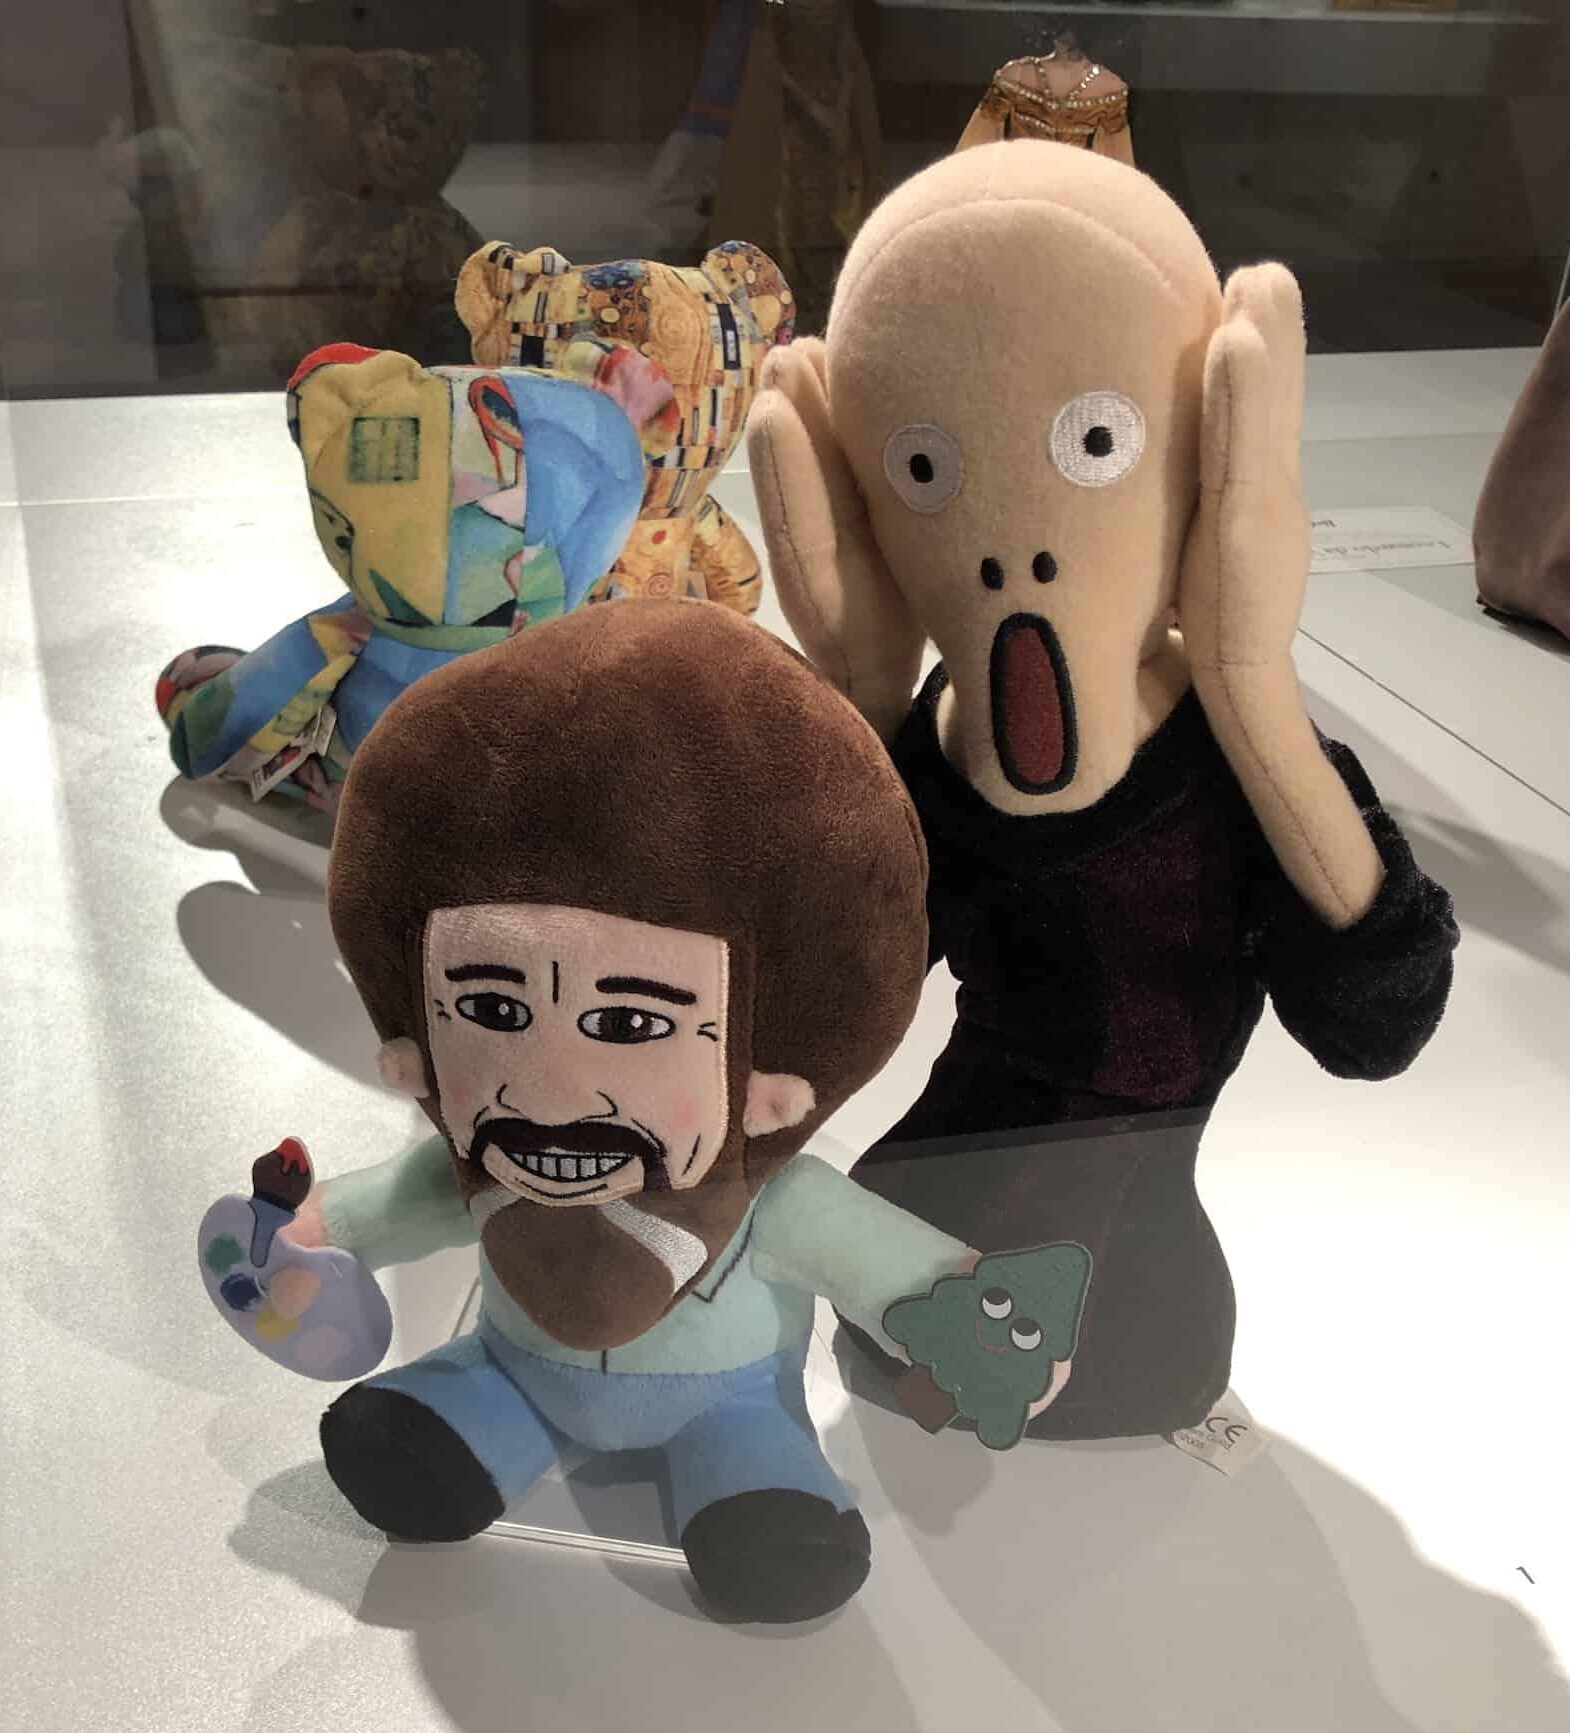 Stuffed figures of Bob Ross and The Scream by Edvard Munch